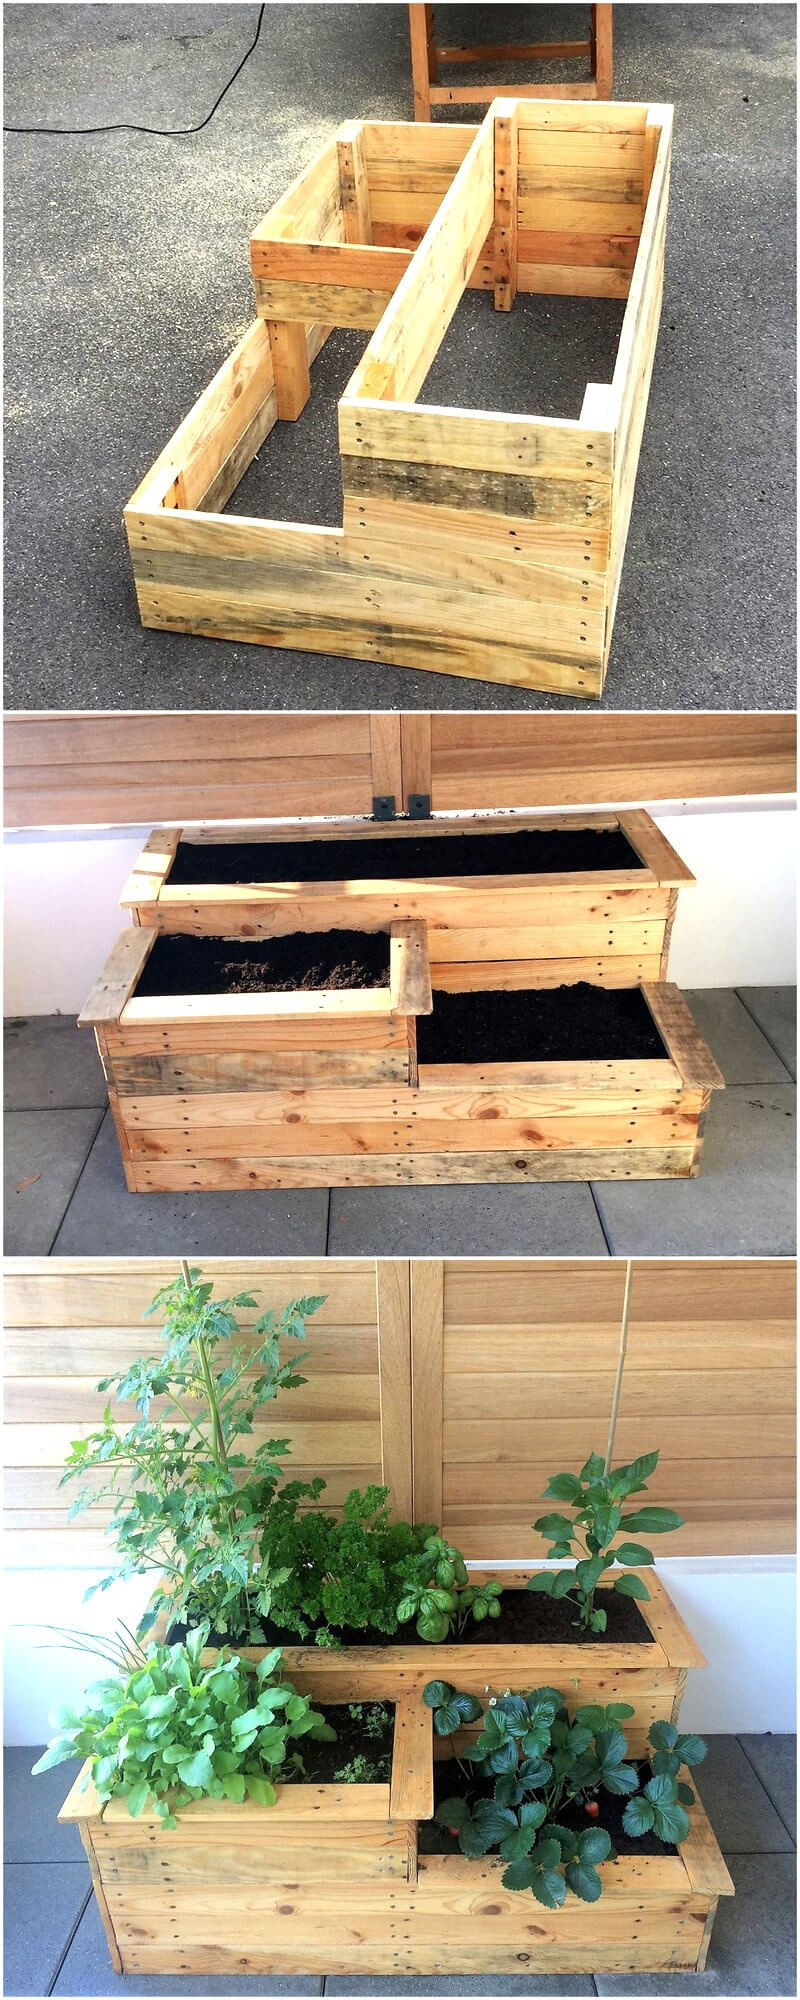 Repurposing Plans for Shipping Wood Pallets | Wood Pallet ...